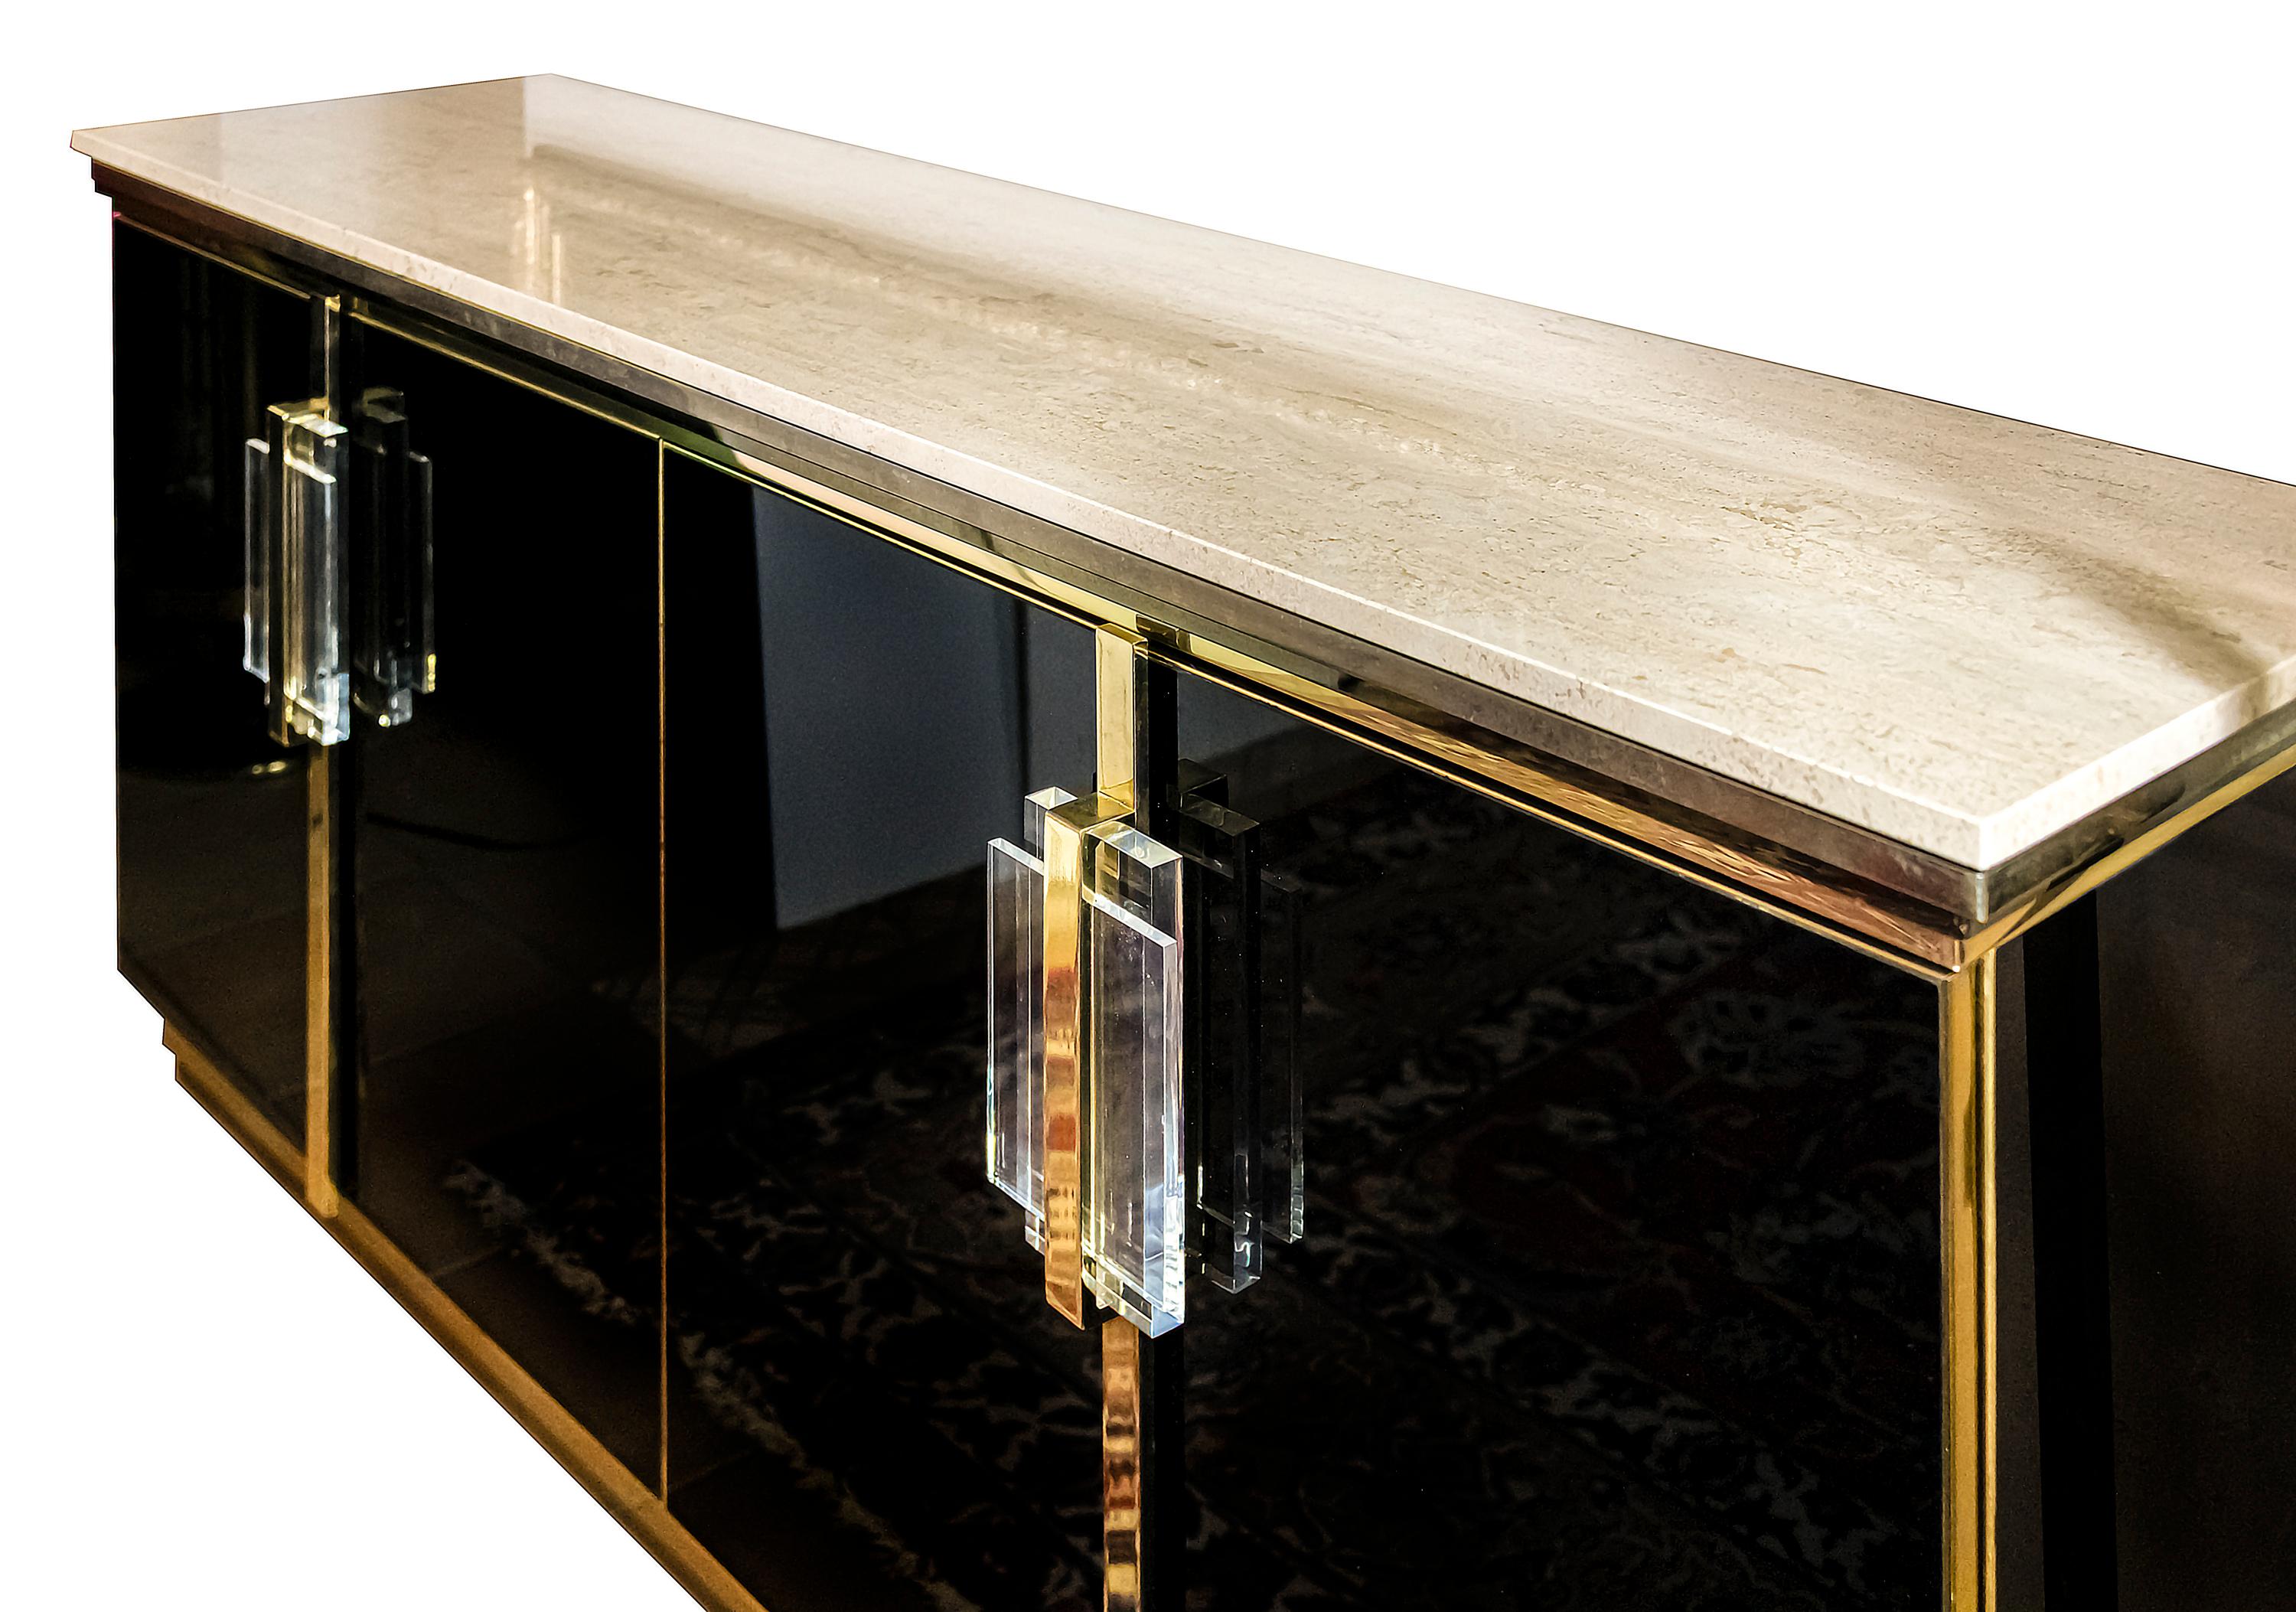 Vintage sideboard / commode from 1970s in the style of Maison Jansen.
Doors are covered with black glass panels and decorated with massive plexiglass handles.
The top is travertine stone.
The pedestal and travertine base are created in brass